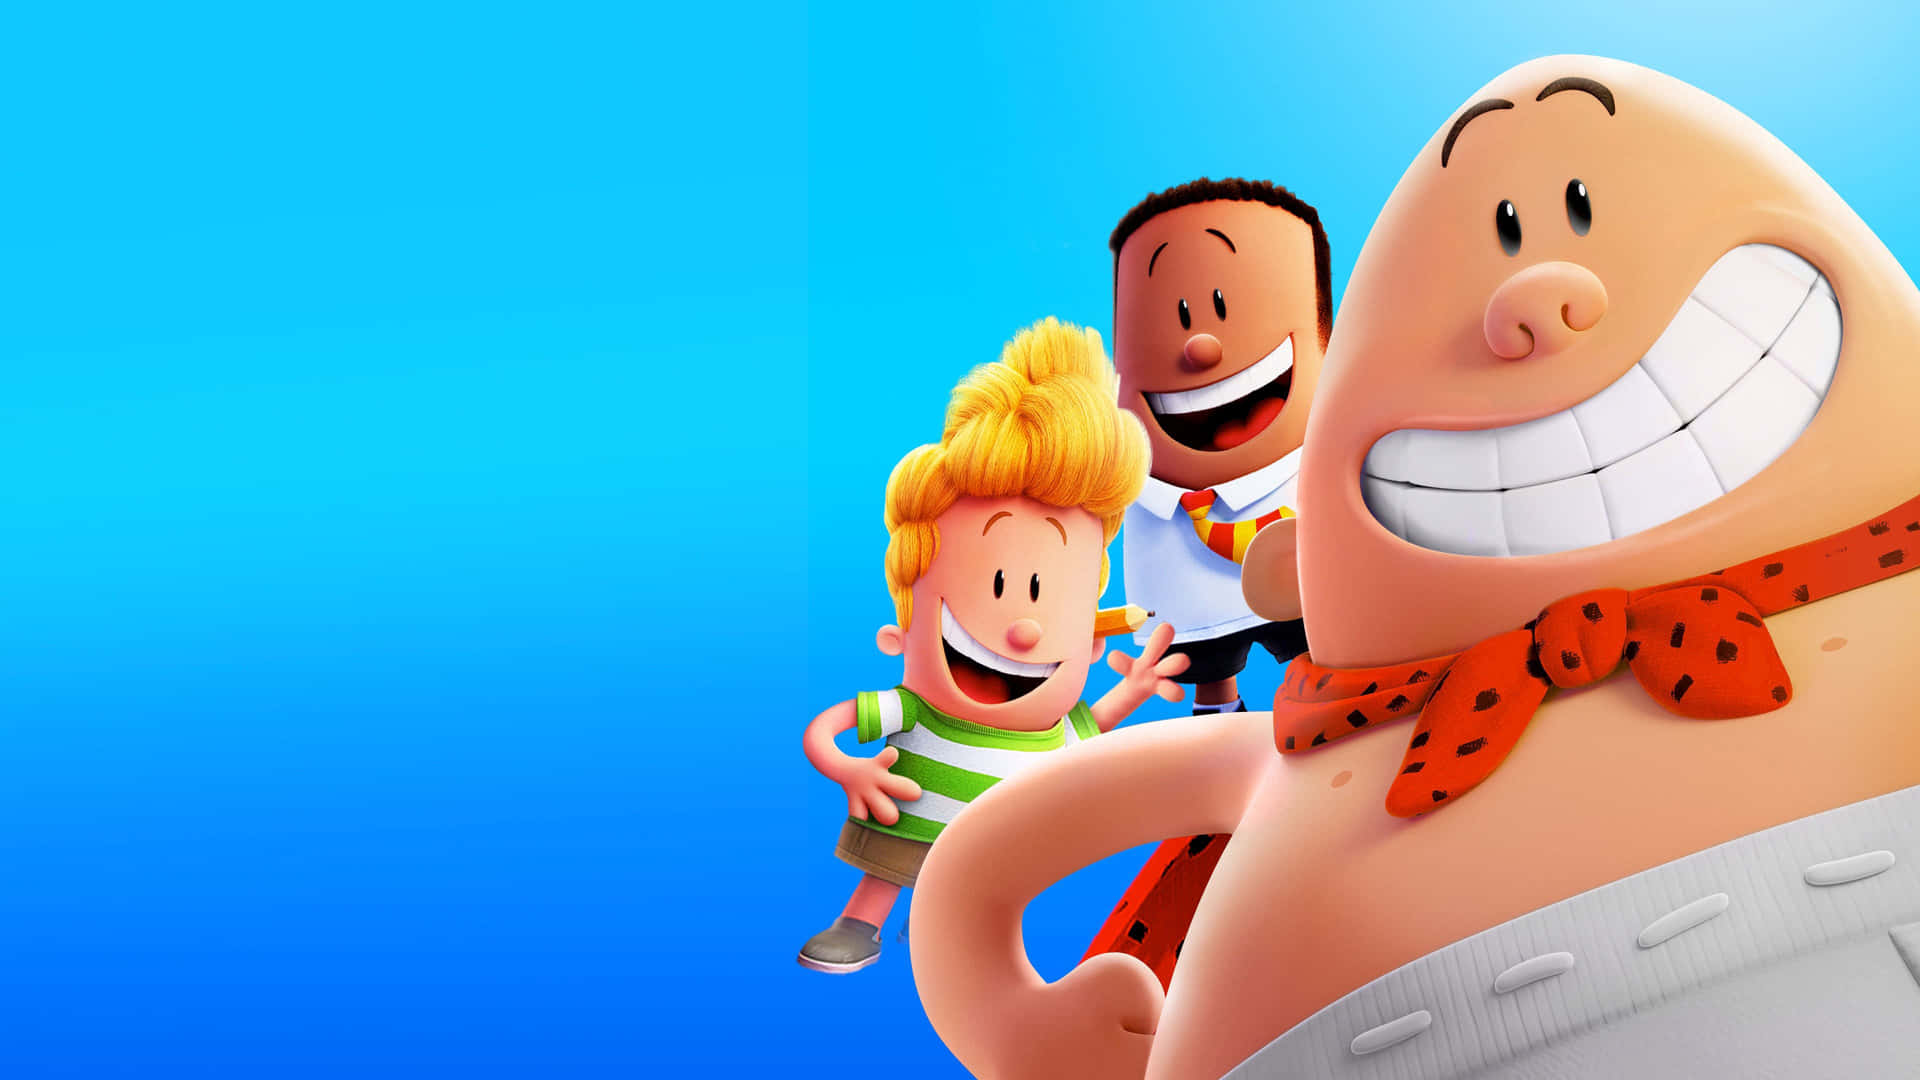 Kids Behind Captain Underpants: The First Epic Movie Wallpaper